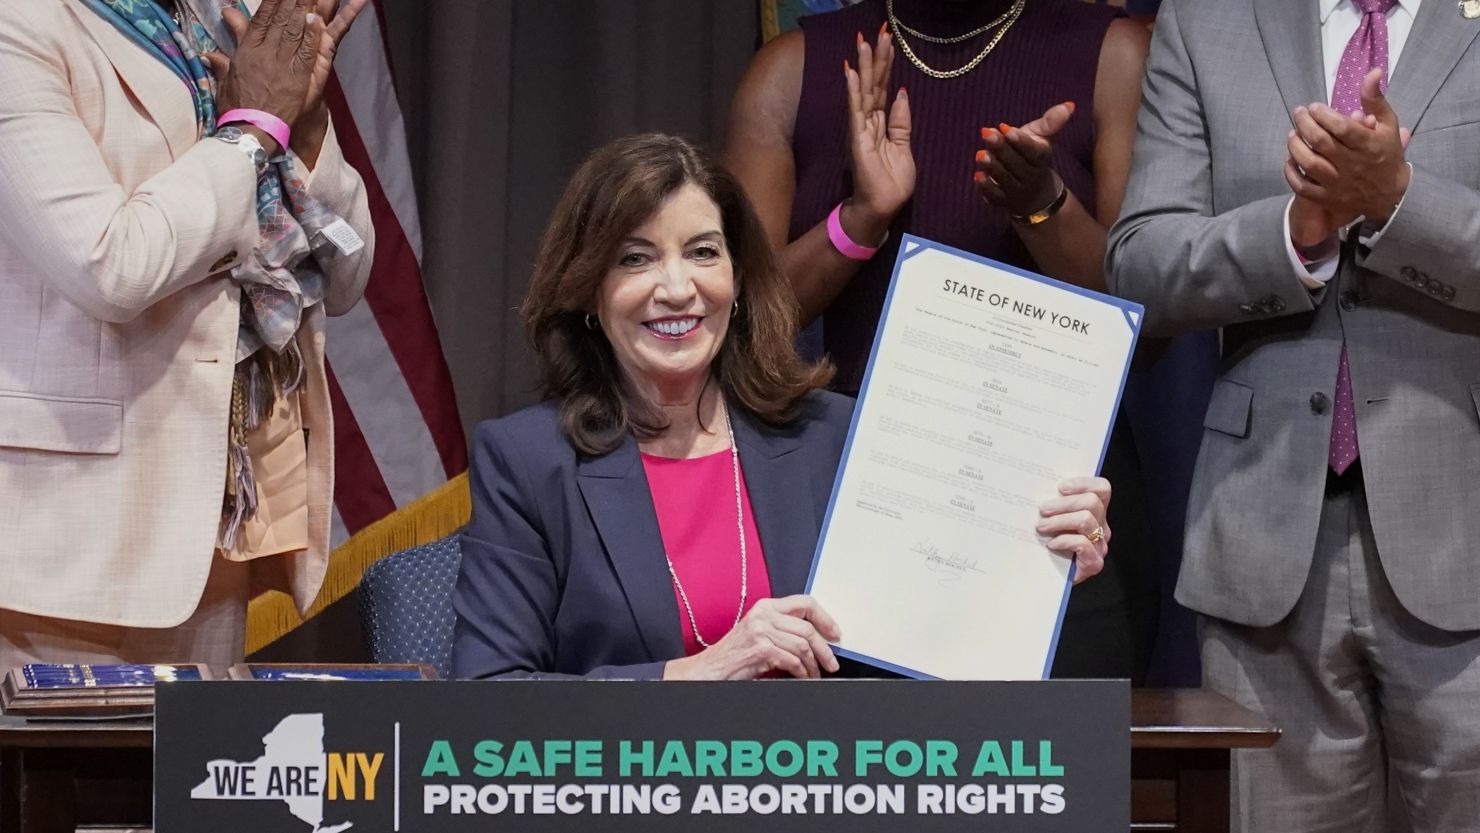 New York Gov. Kathy Hochul, center, poses for photos after signing a legislative package to protect abortion rights during a ceremony in New York on Monday, June 13, 2022.